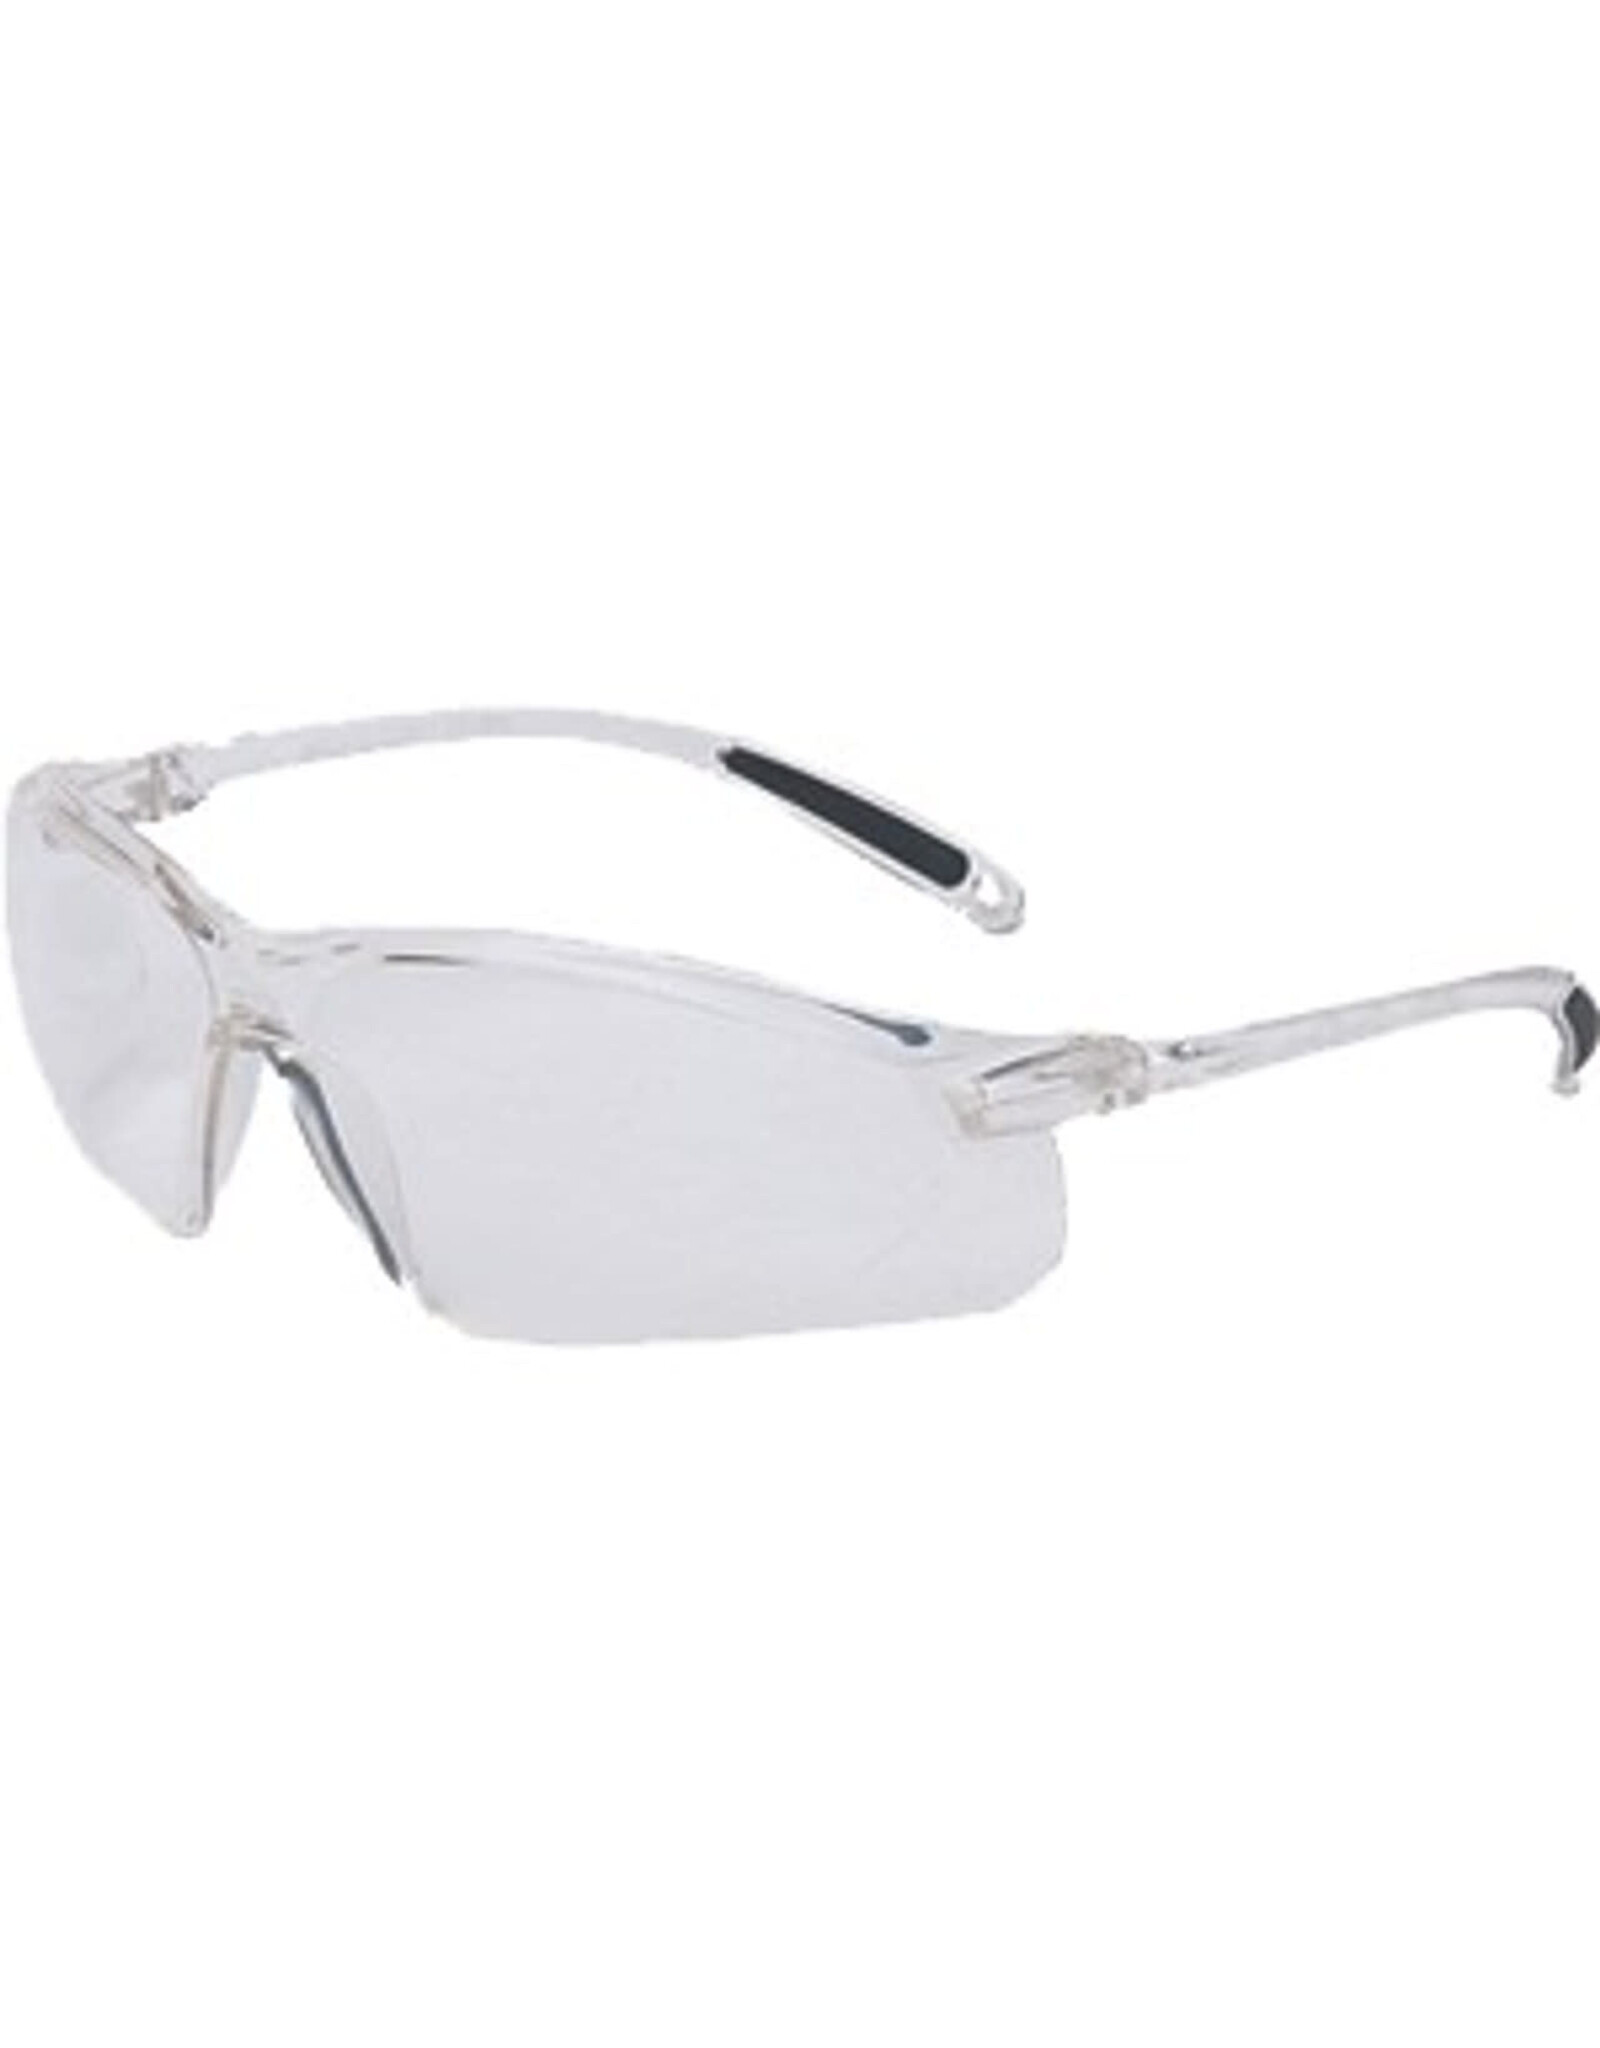 Howard Leight Howard Leight A700 Shooting Glasses